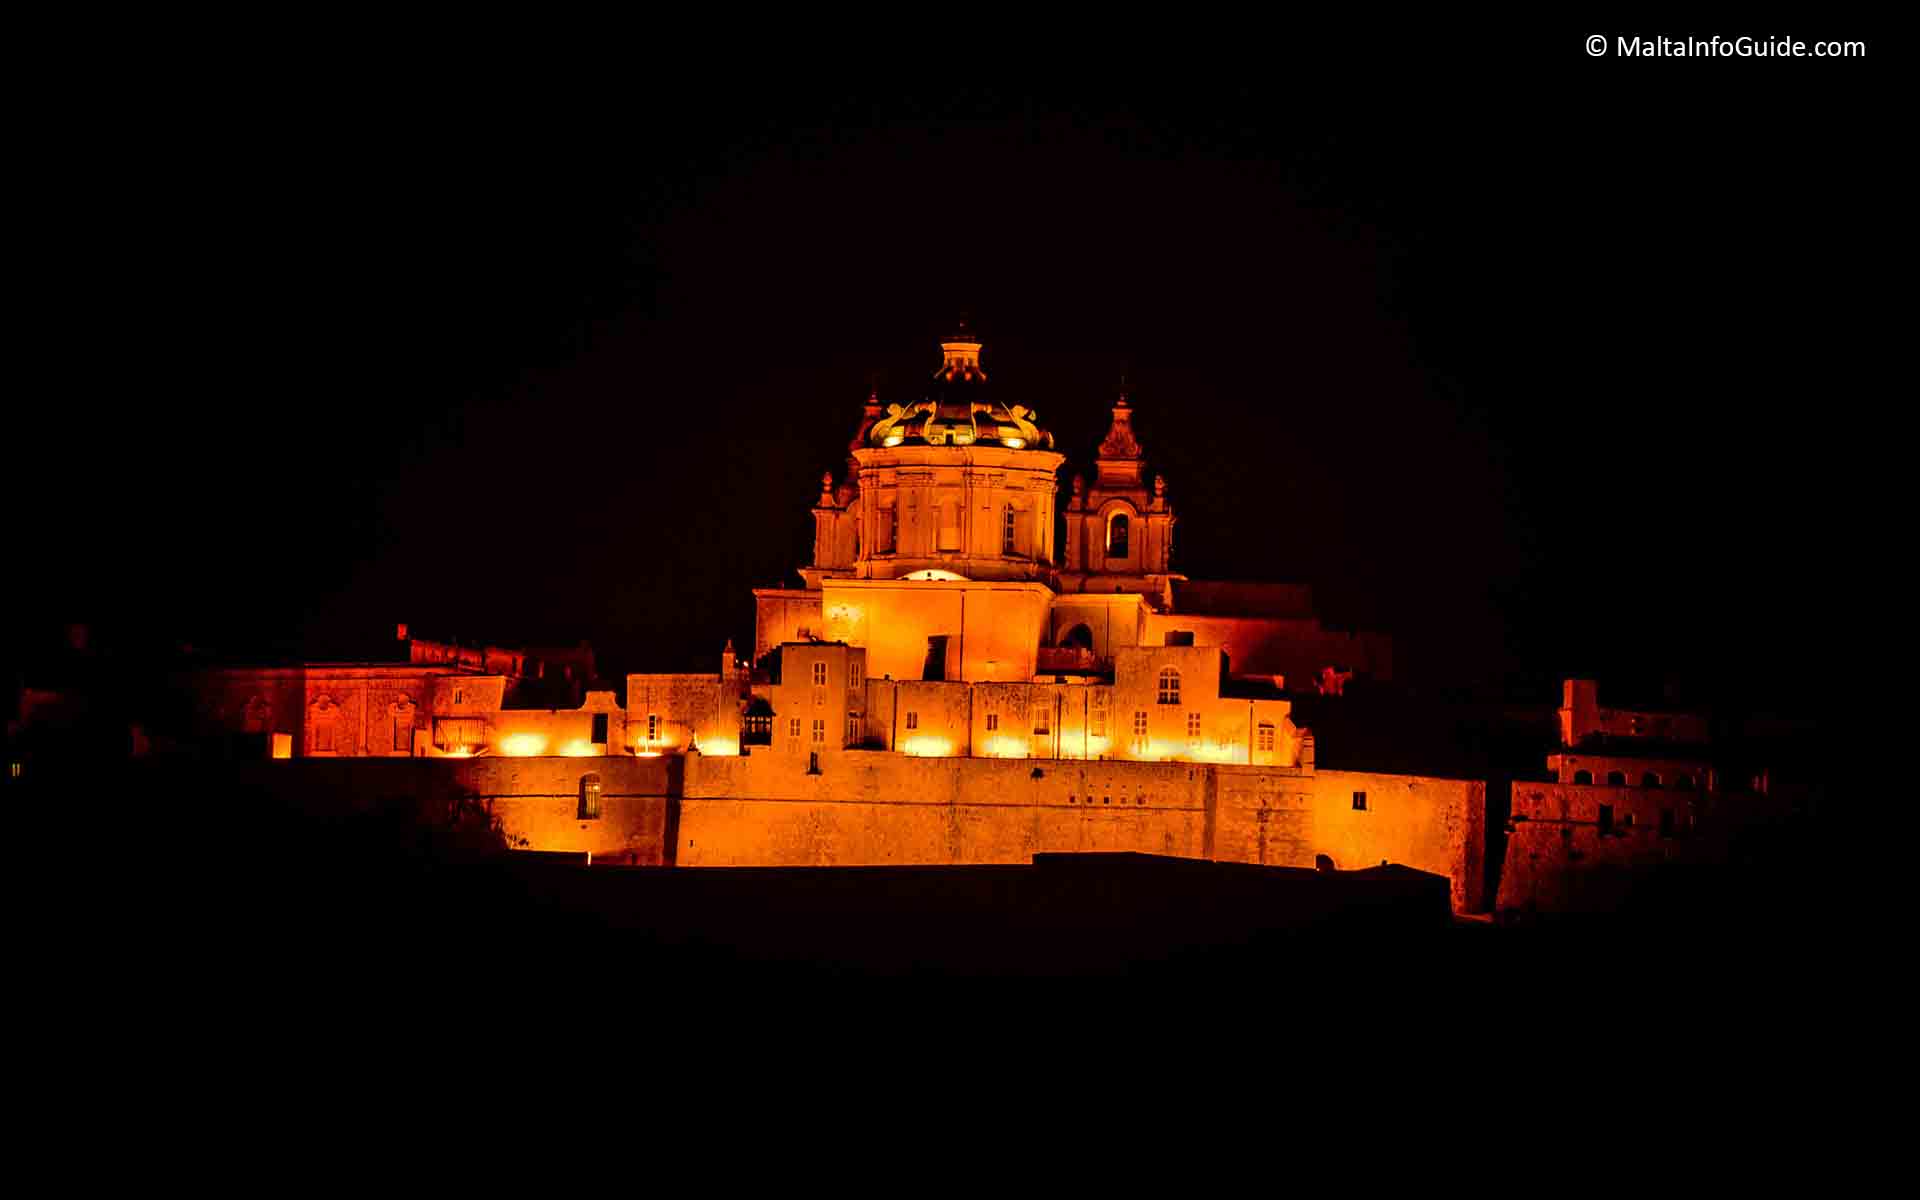 The cathedral of Mdina as seen from Ta' Qali Malta.